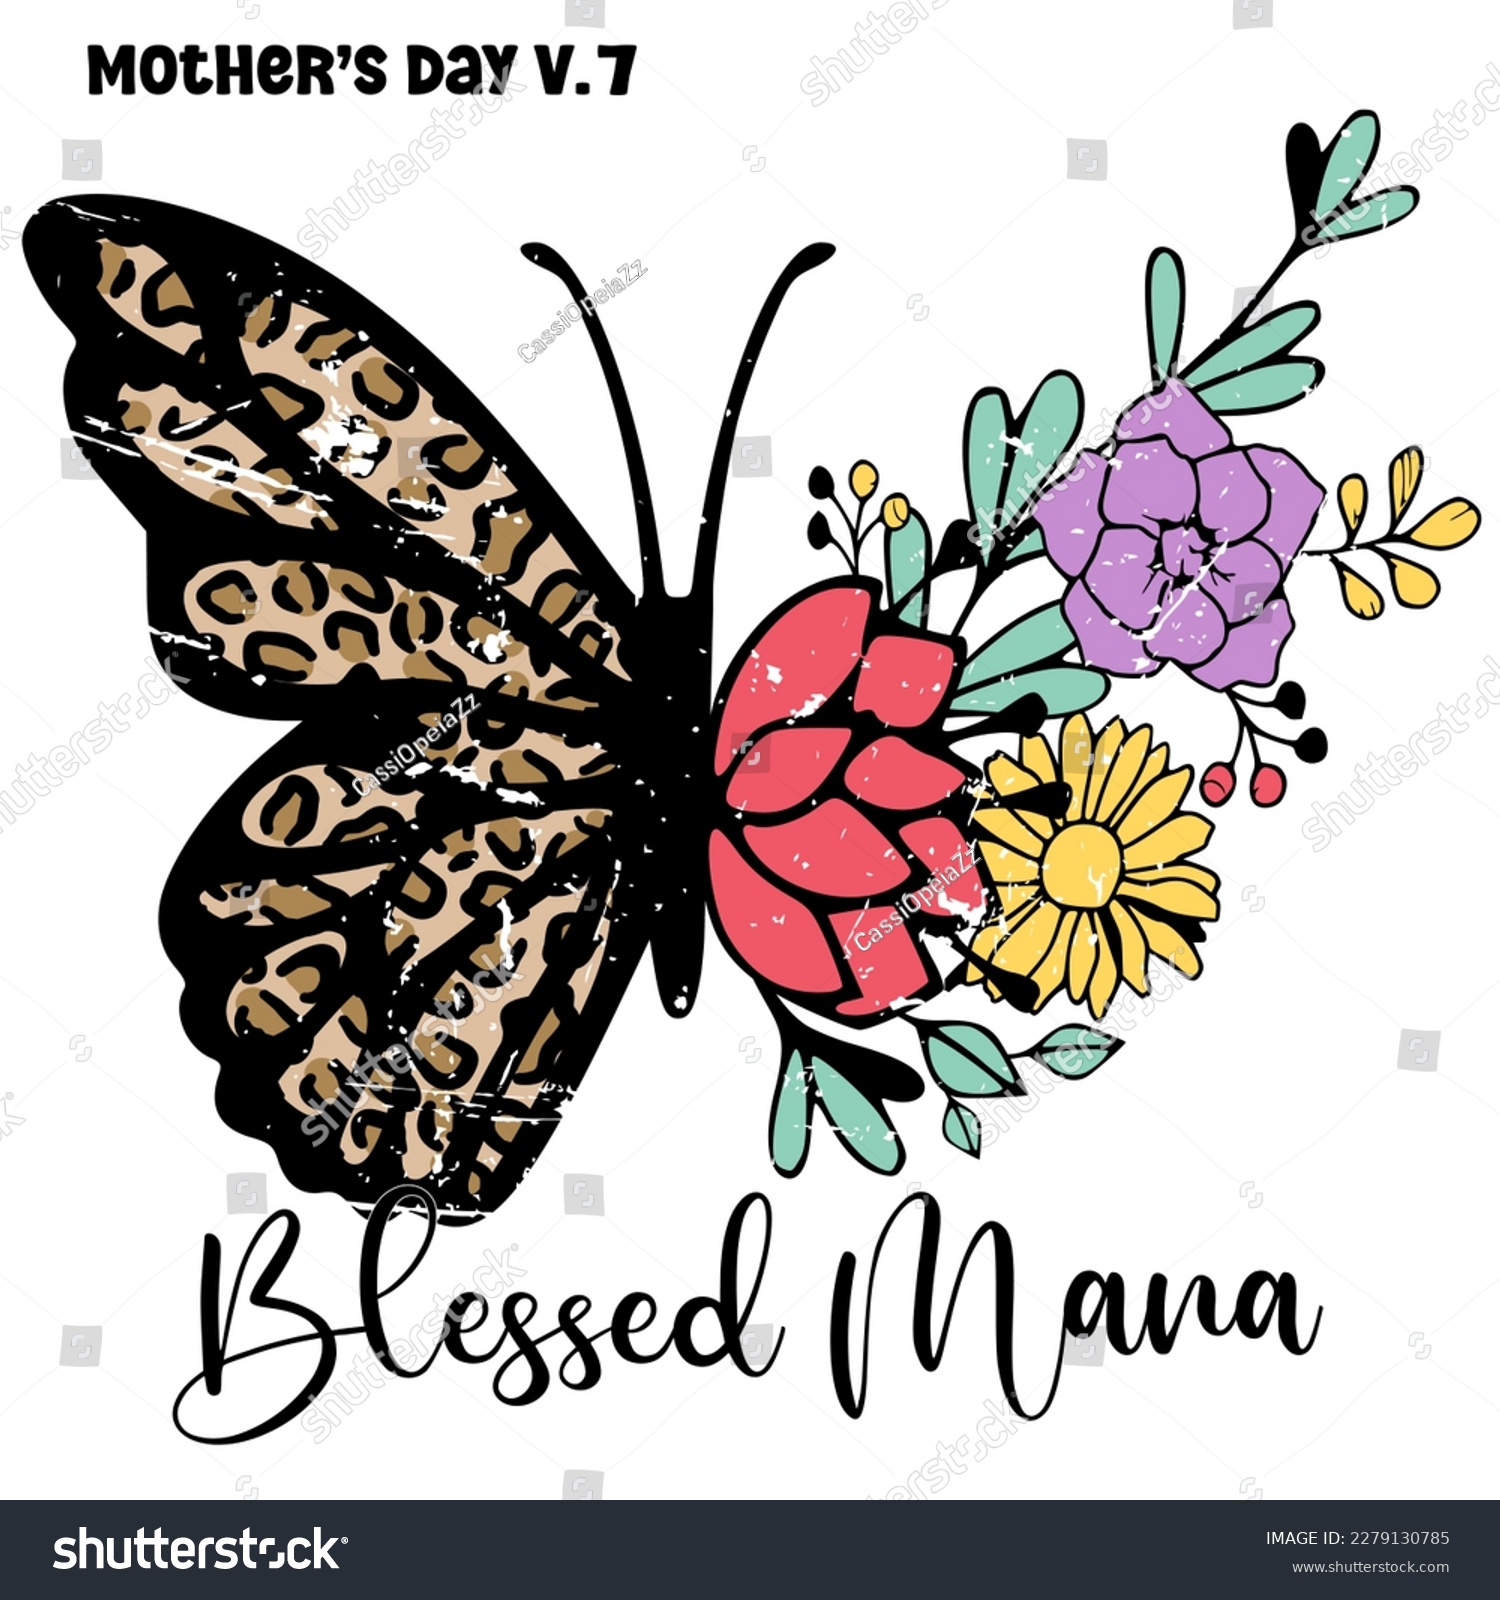 SVG of Blessed Mama , blessed mama mother's day butterfly leopard flower  Texture colorful Retro groovy 80s 90s Style Design for T-Shirt And SVG. , Mother's Day V.7 svg